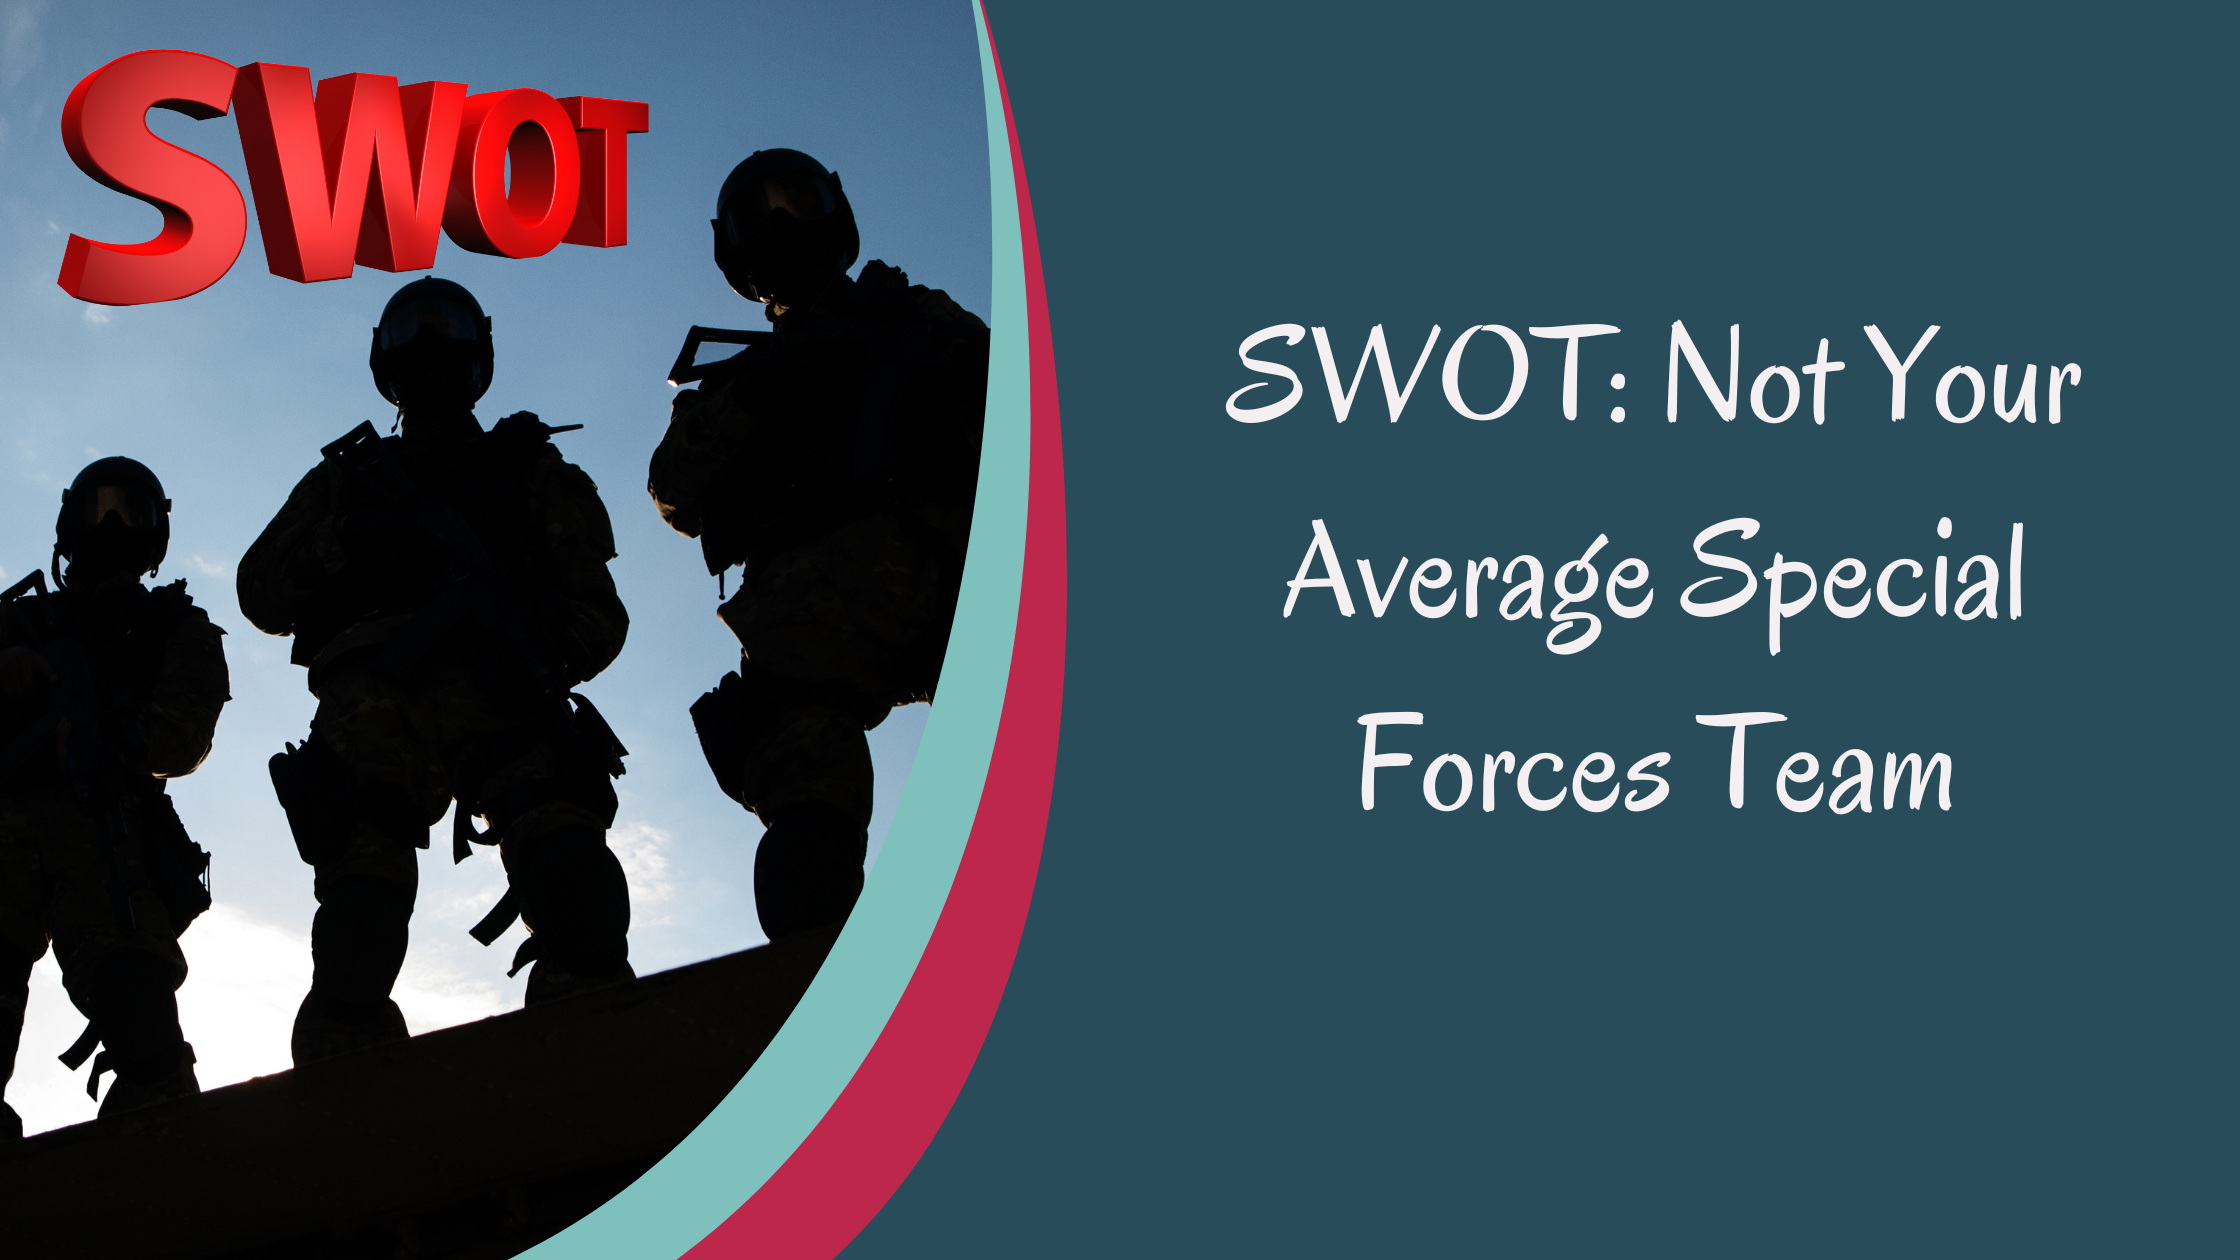 SWOT: Not Your Average Special Forces Team